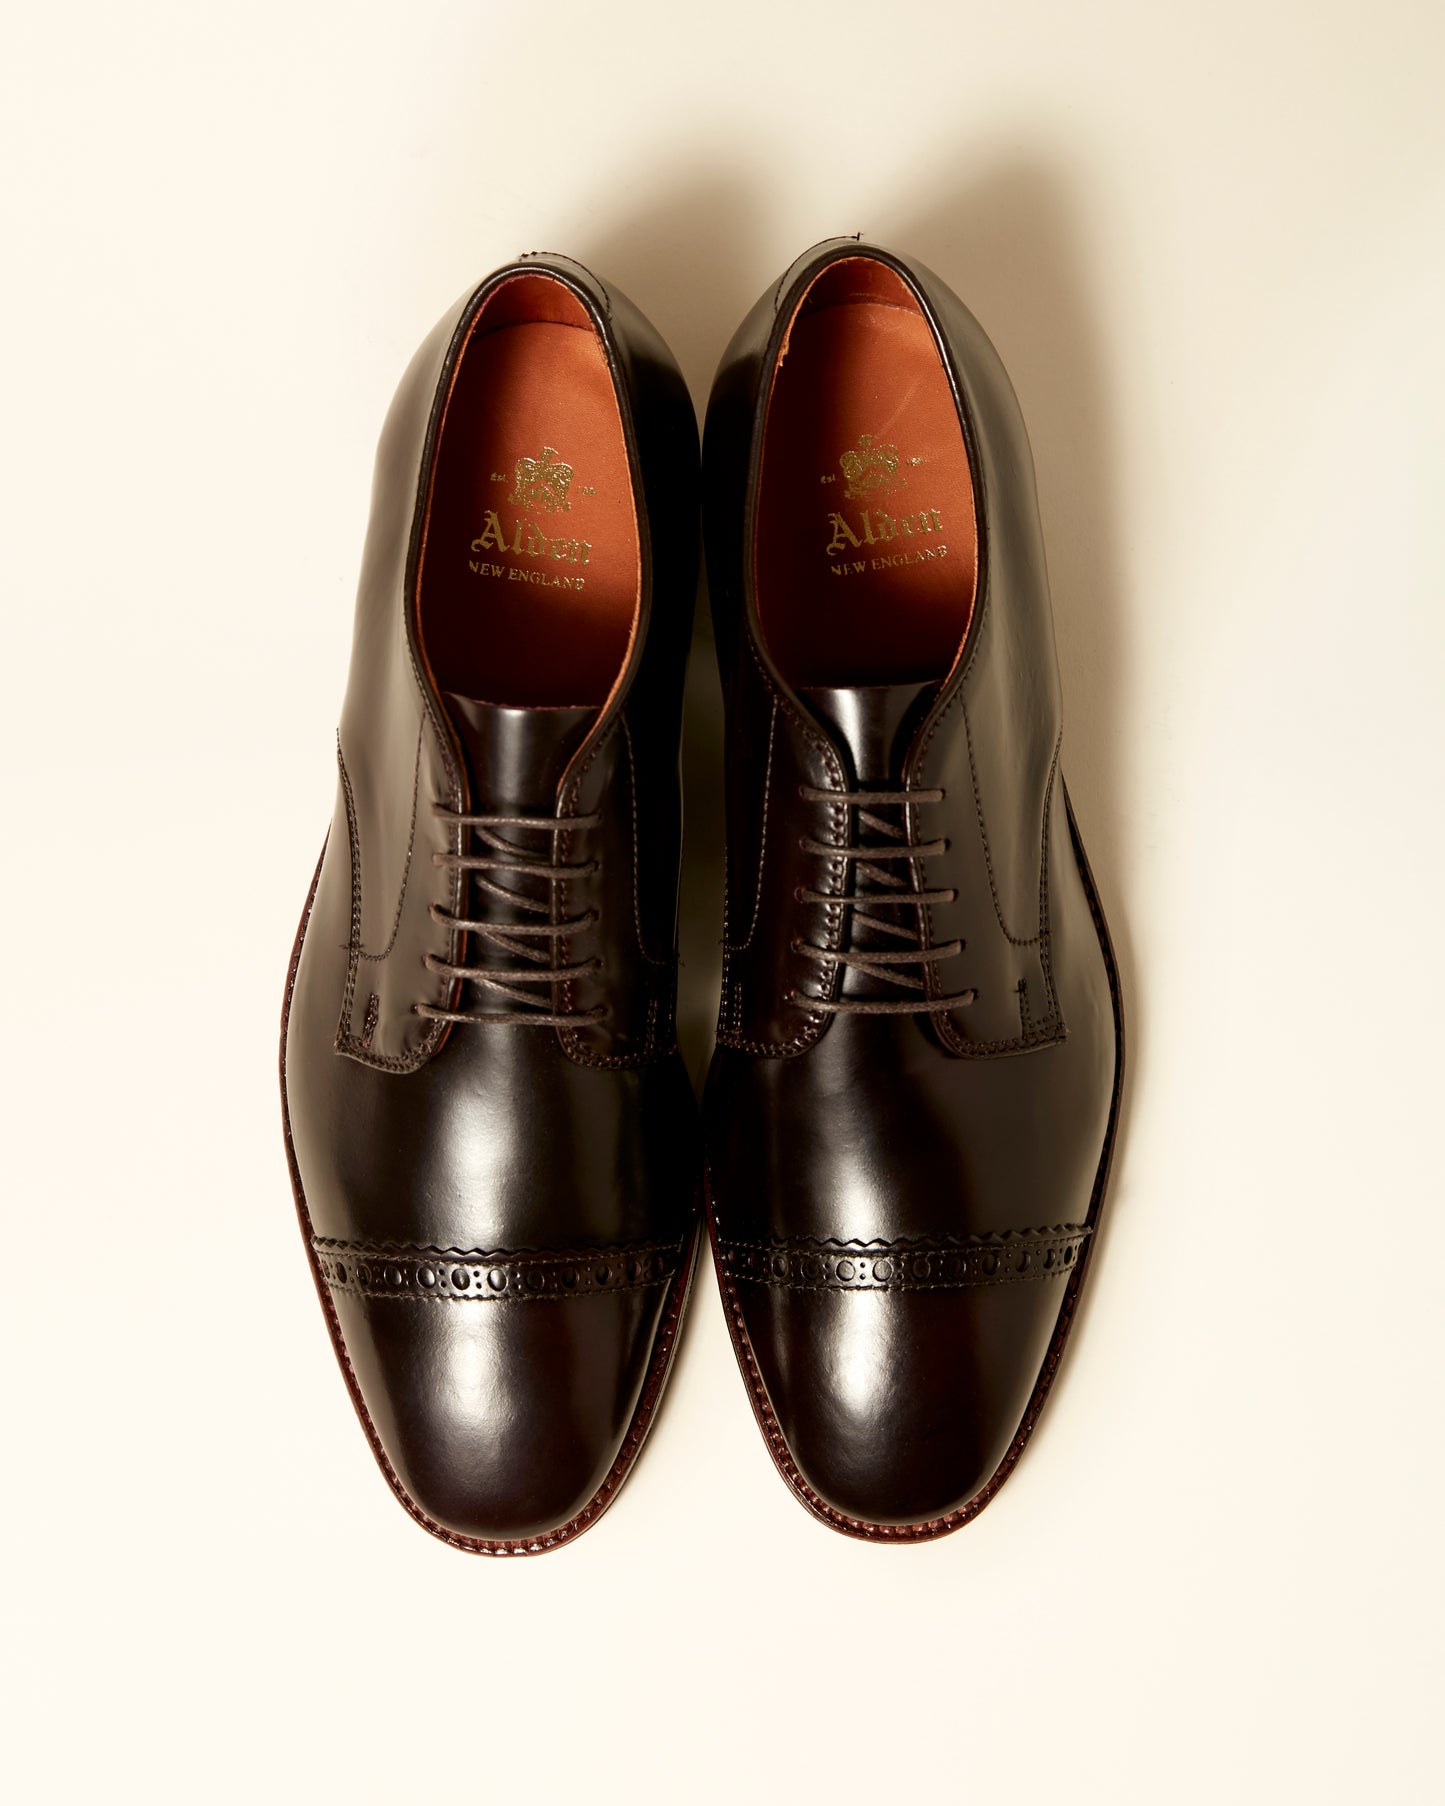 "Director" Unlined Perforated Tip Blucher in Color 8 Shell Cordovan, Plaza Last